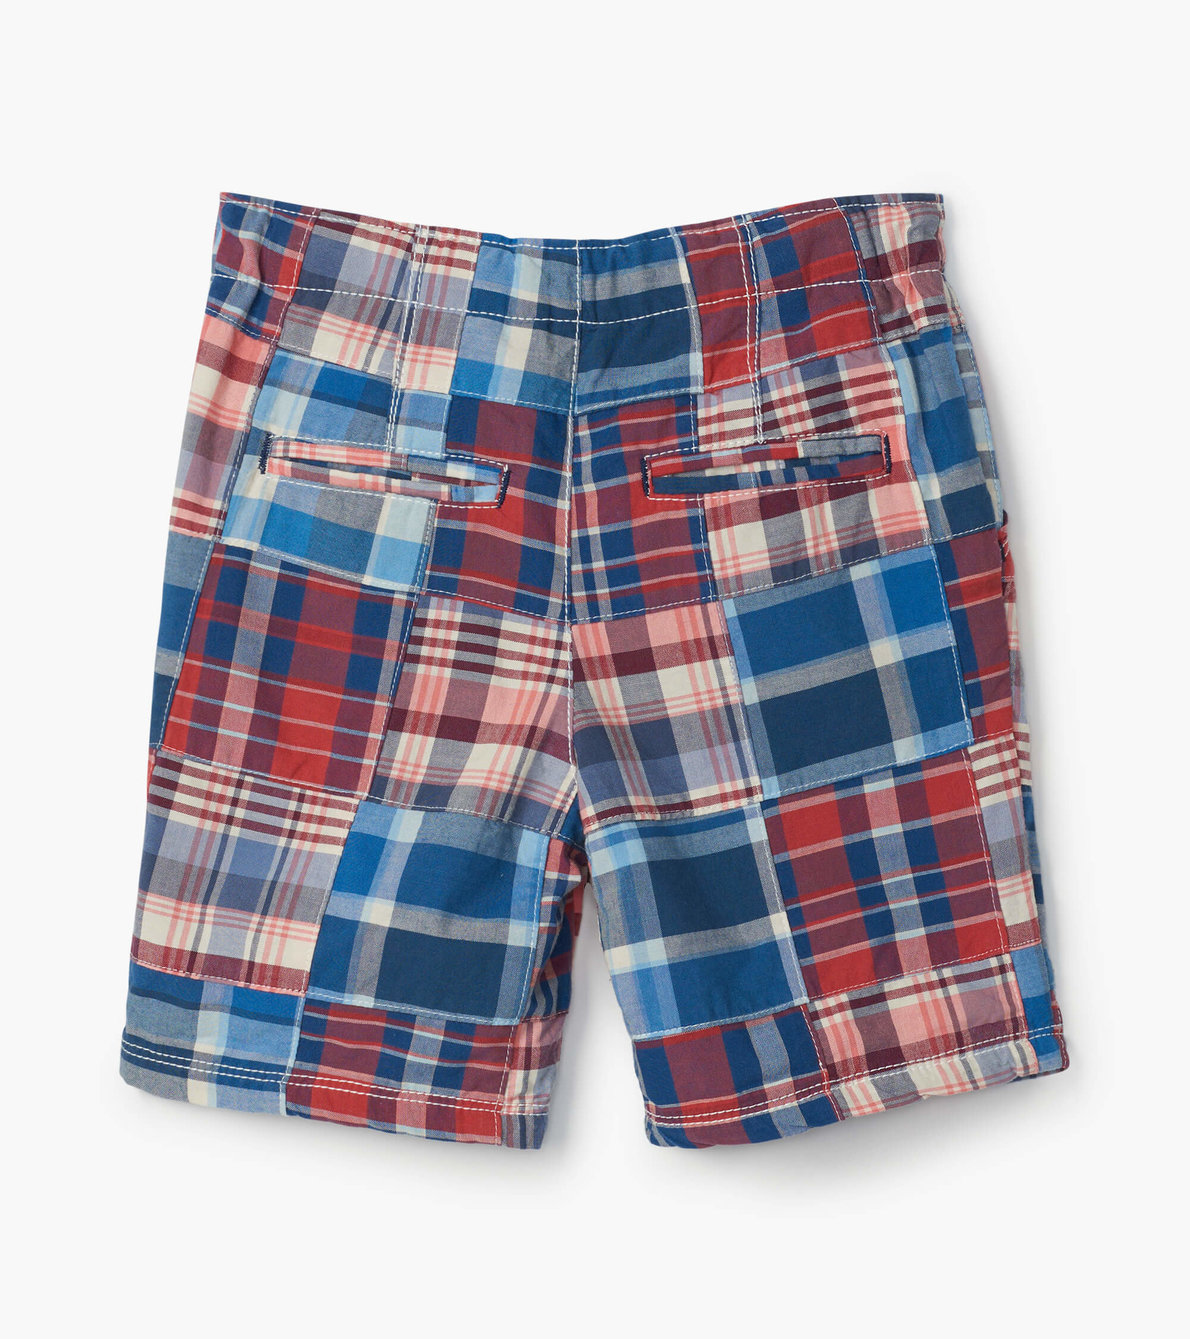 View larger image of Madras Plaid Shorts